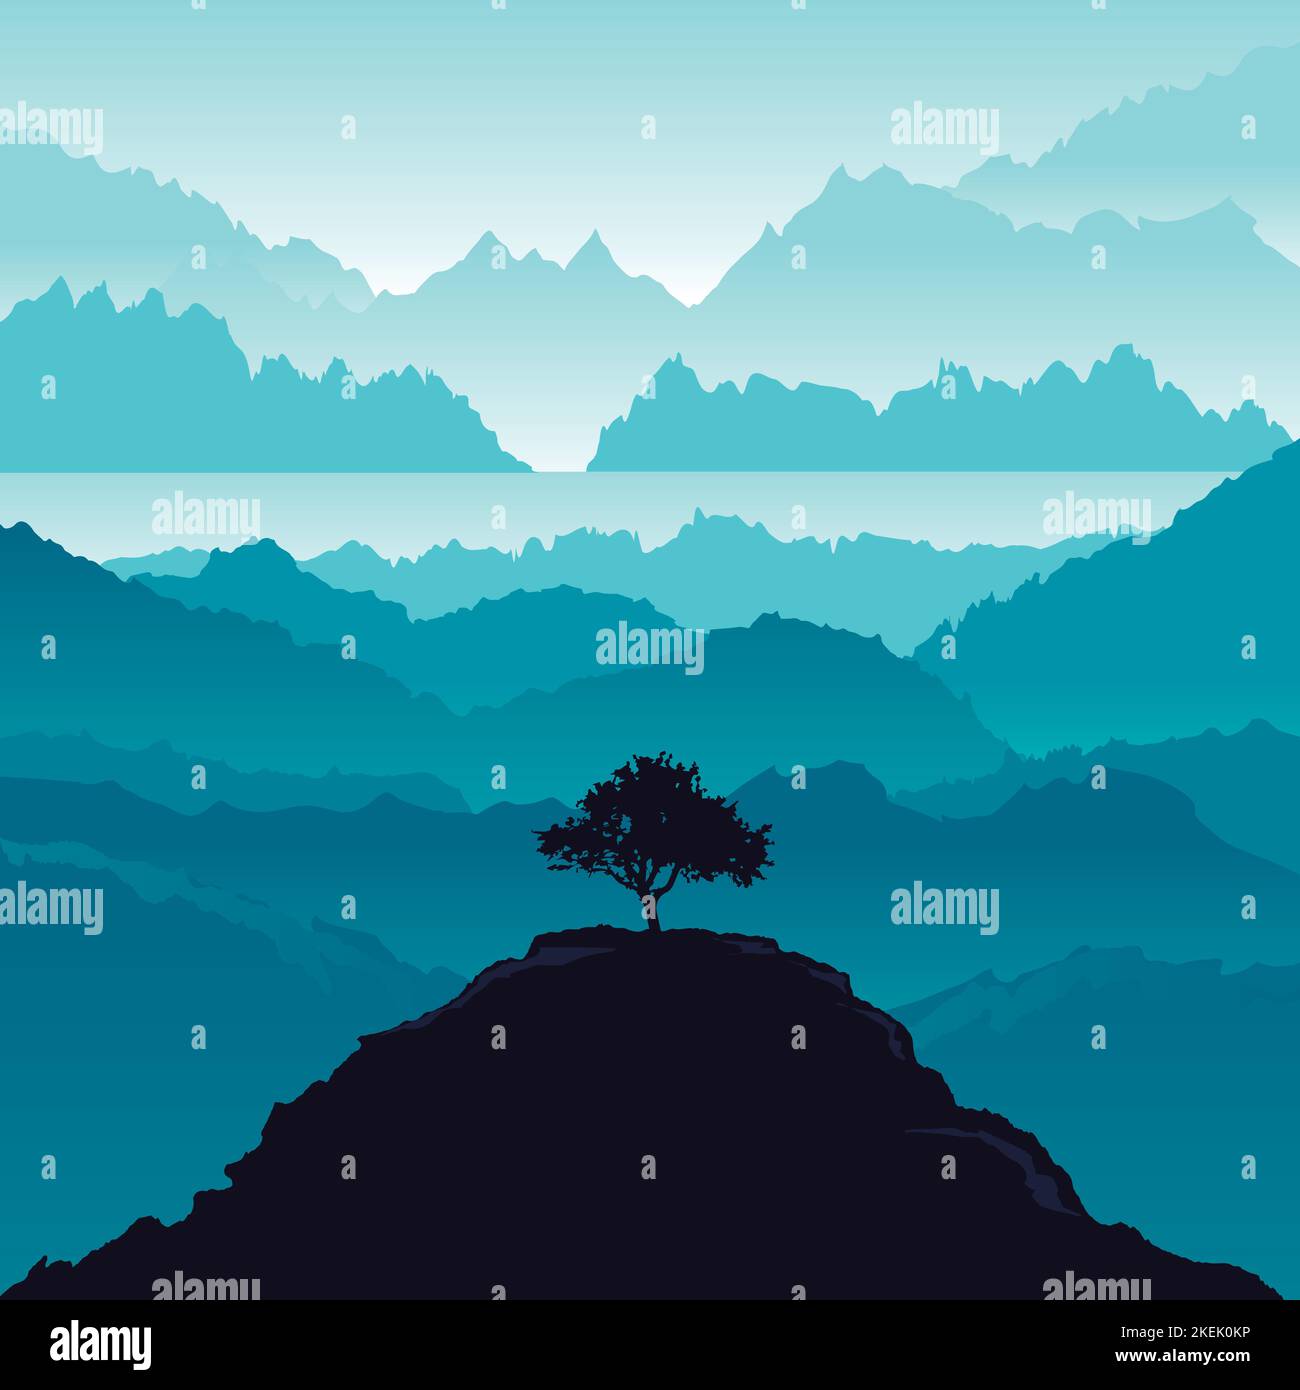 Tree of mountains, Tree and mountains silhouettes, hill station, moon and mountains, Blue And Purple Gradient Pictures, mountain station, in the backg Stock Vector